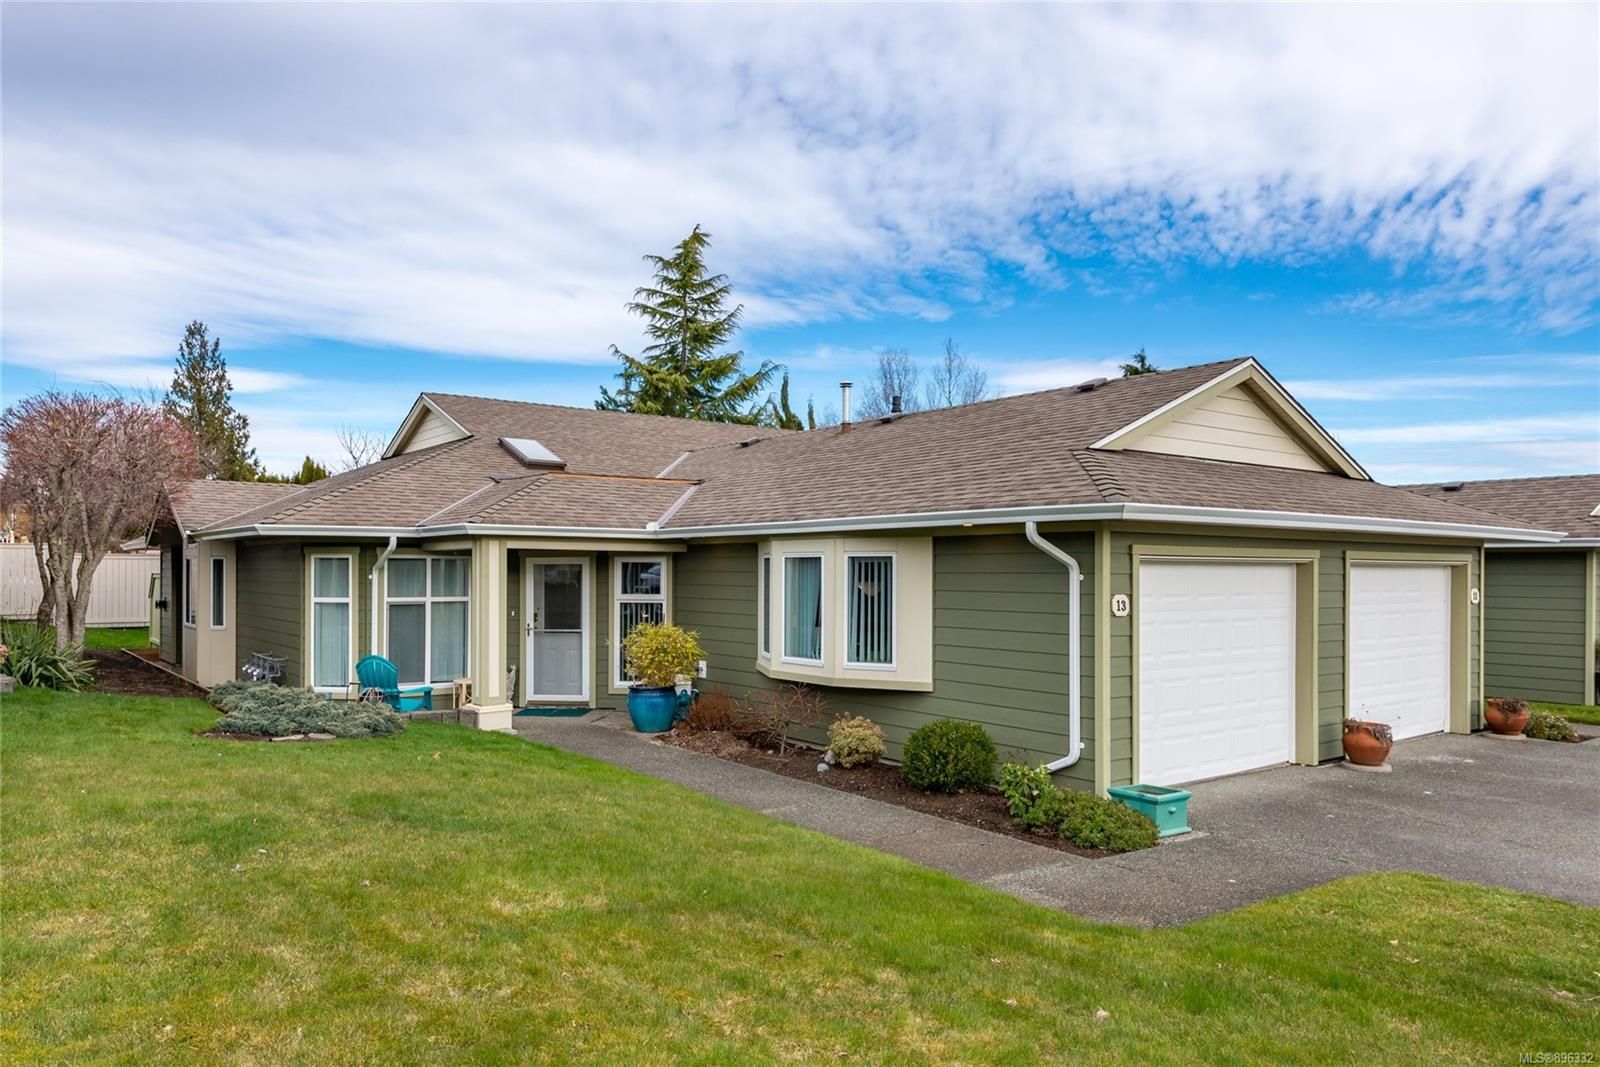 I have sold a property at 13 650 Yorkshire Dr in Campbell River
